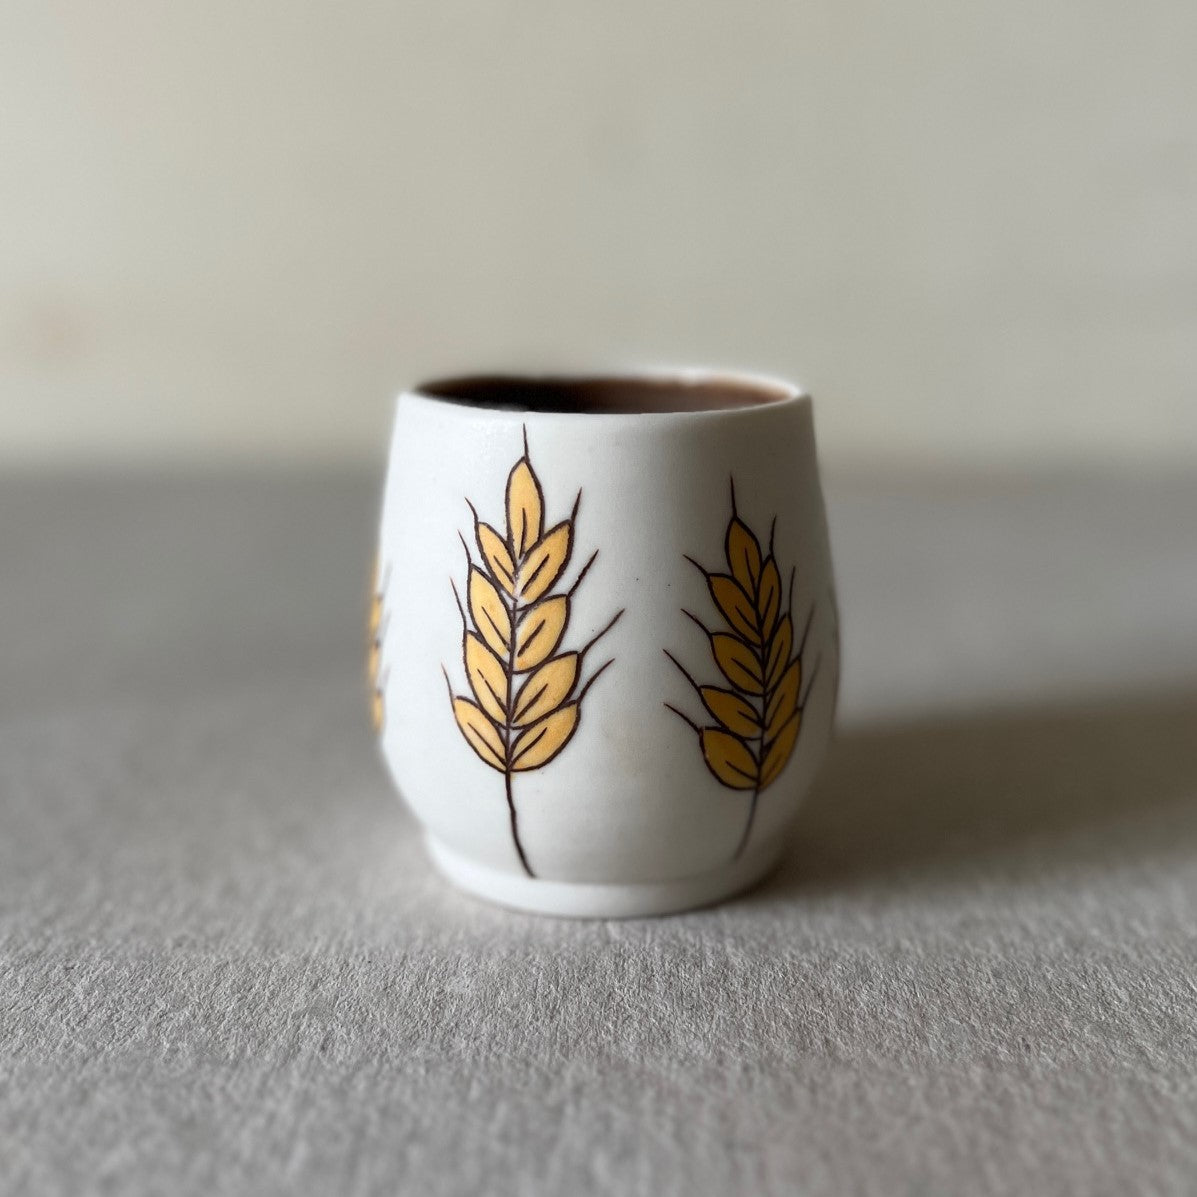 Sophie Cargill Wheat Stalk Cup